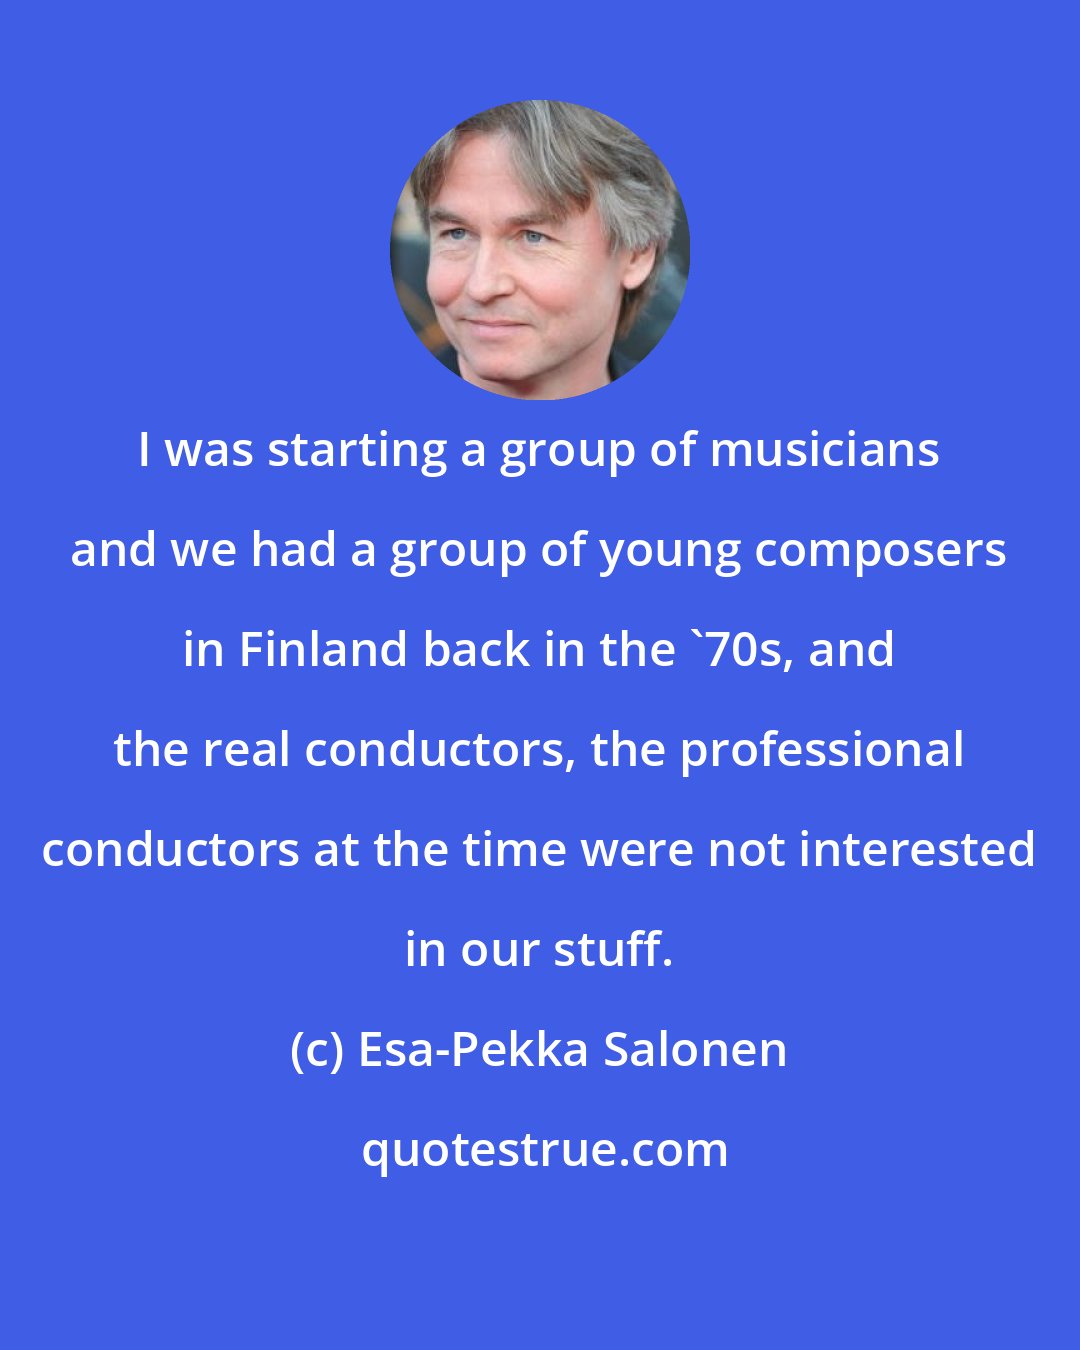 Esa-Pekka Salonen: I was starting a group of musicians and we had a group of young composers in Finland back in the '70s, and the real conductors, the professional conductors at the time were not interested in our stuff.